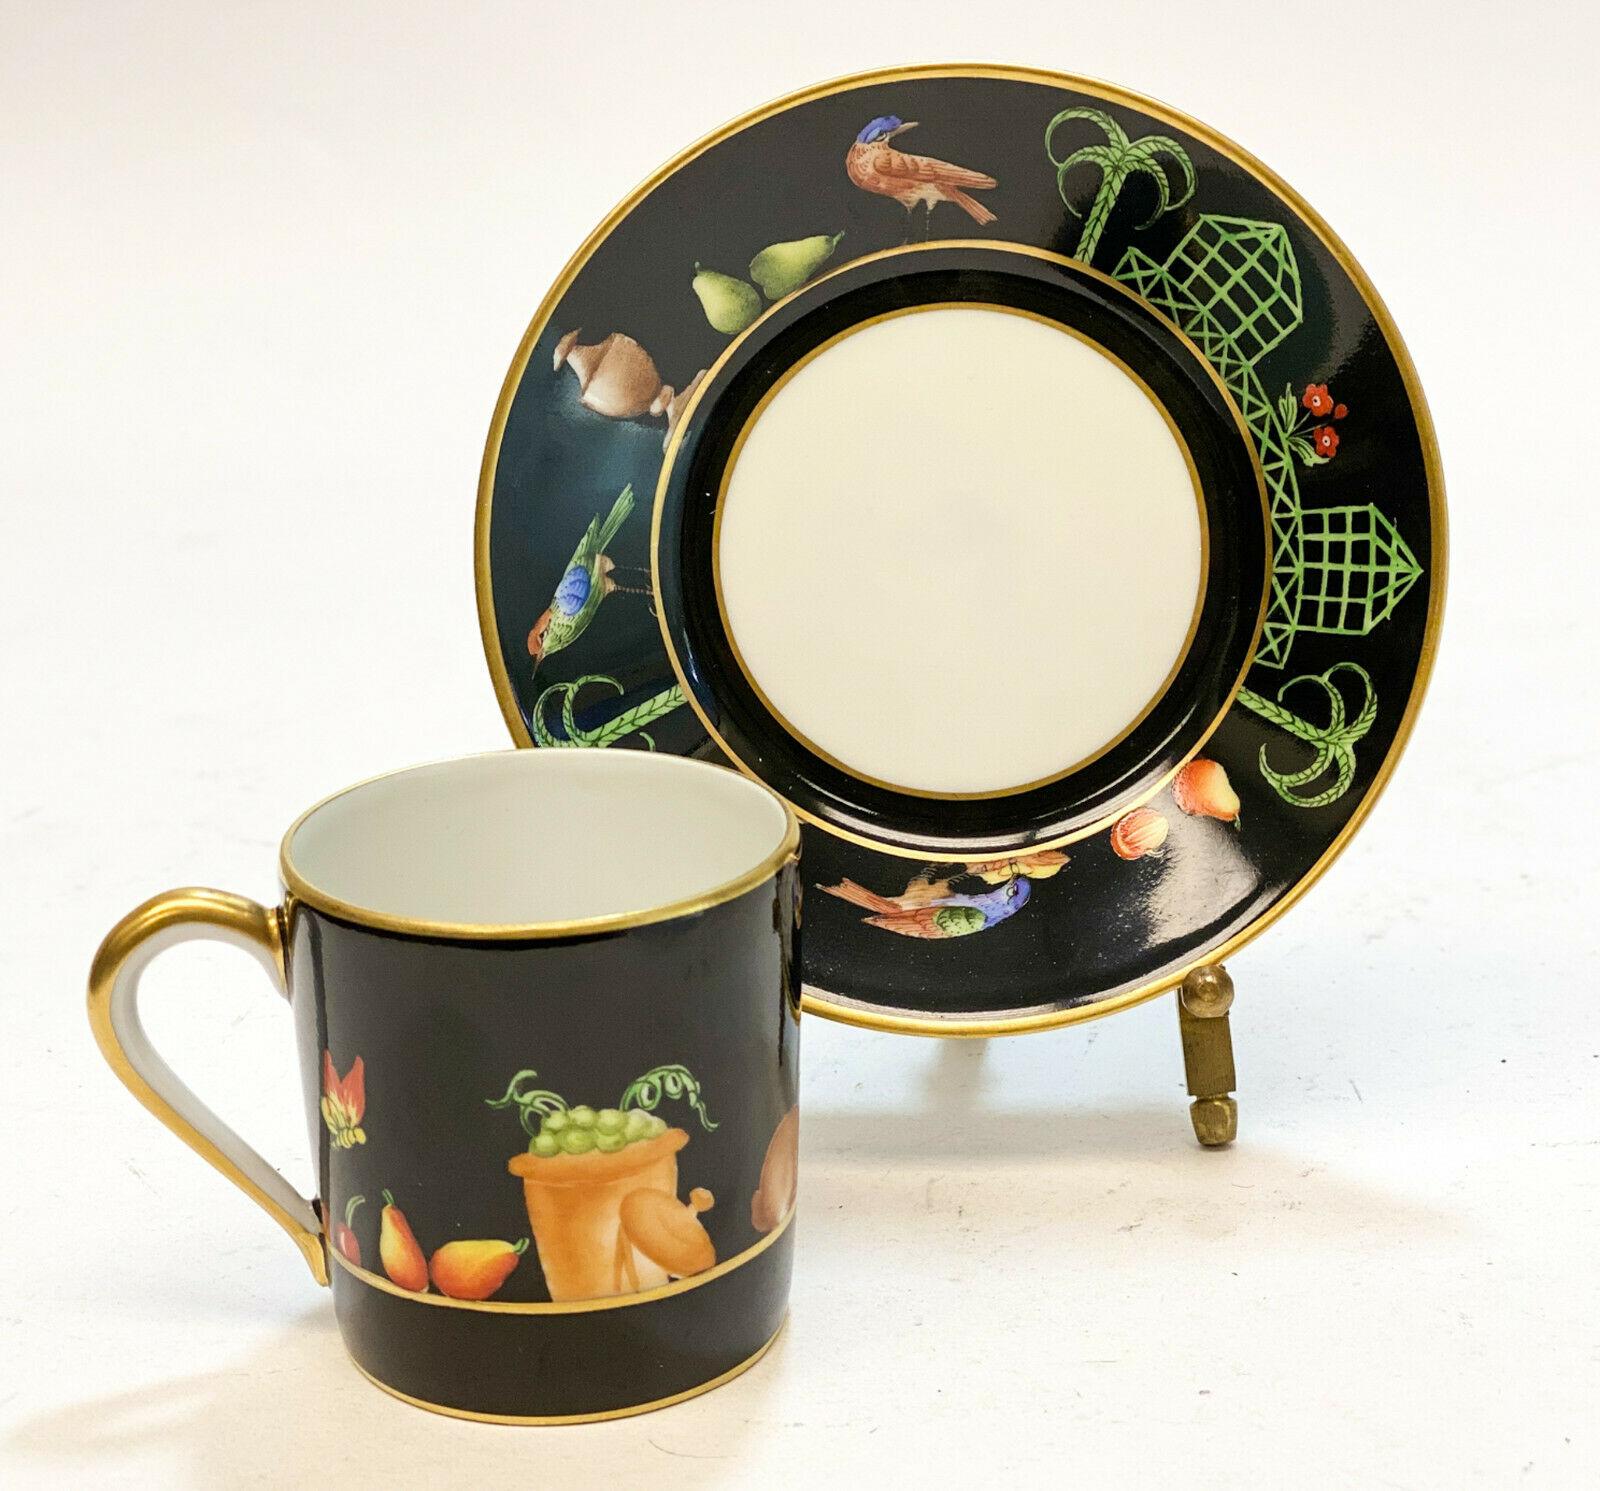 North American 6 Tiffany Private Stock Le Tallec Porcelain Cup and Saucers Black Shoulder For Sale